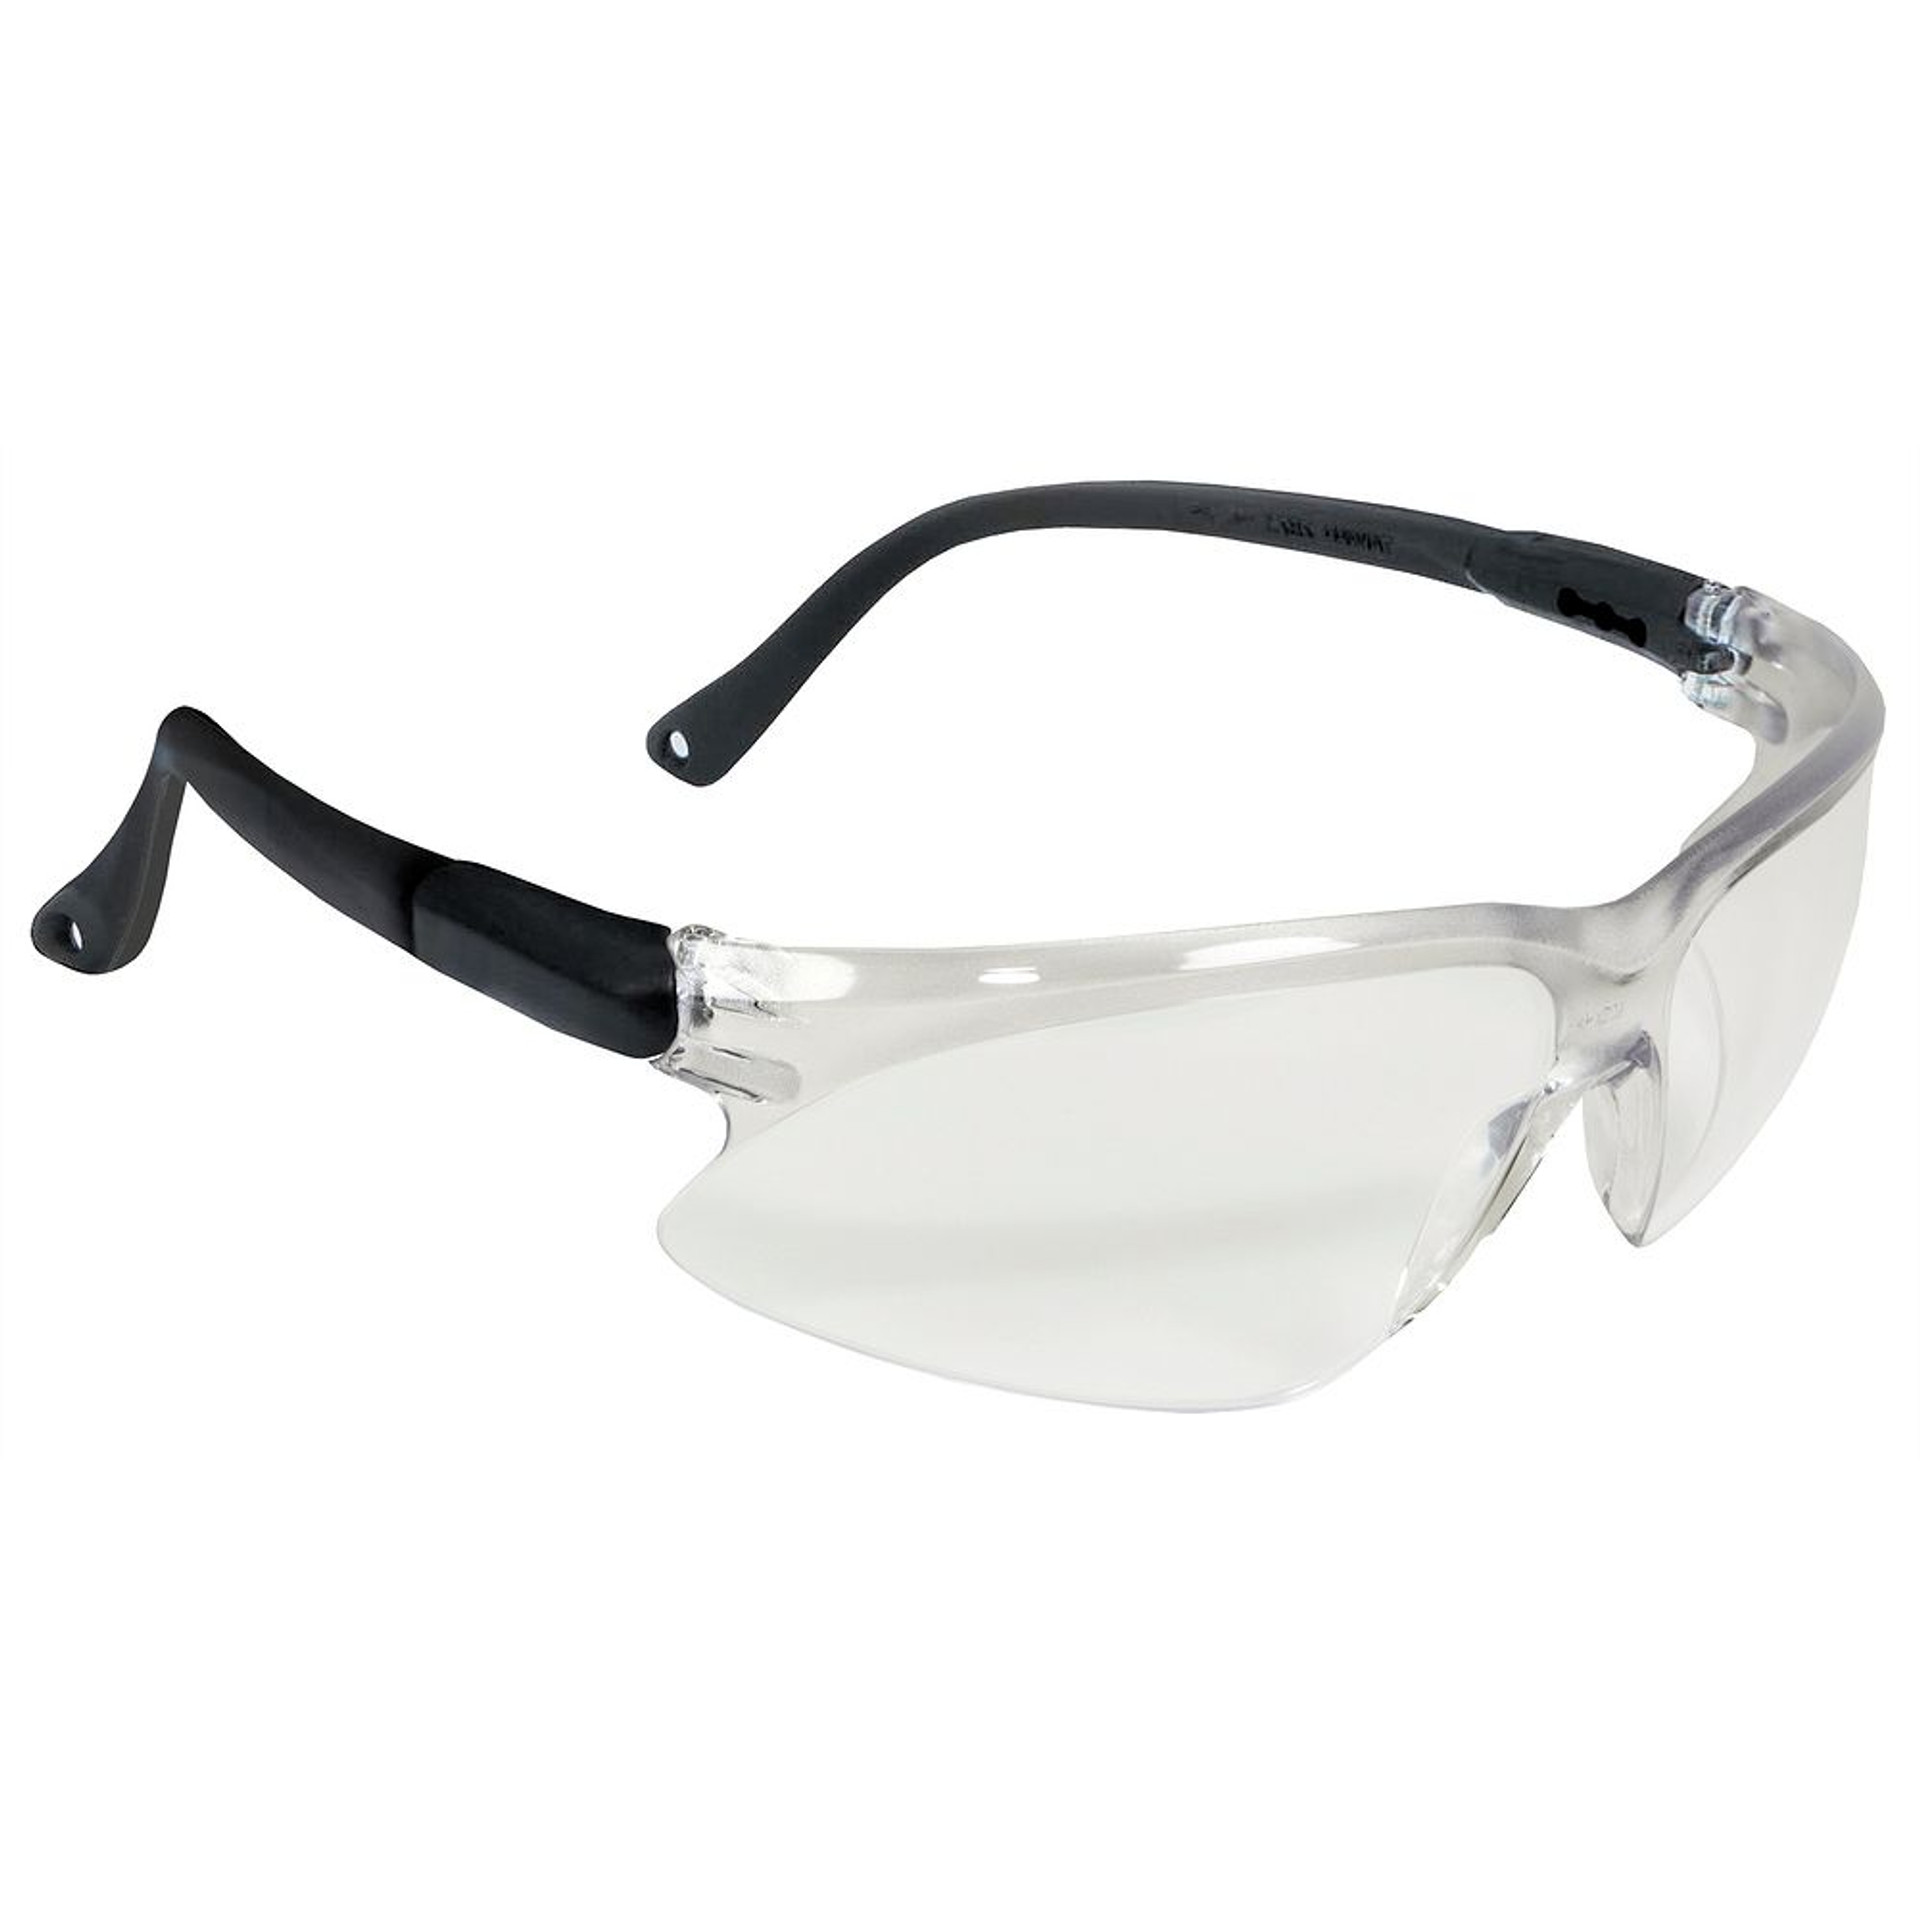 Kleenguard Visio Economy Safety Glasses Clear Uncoated